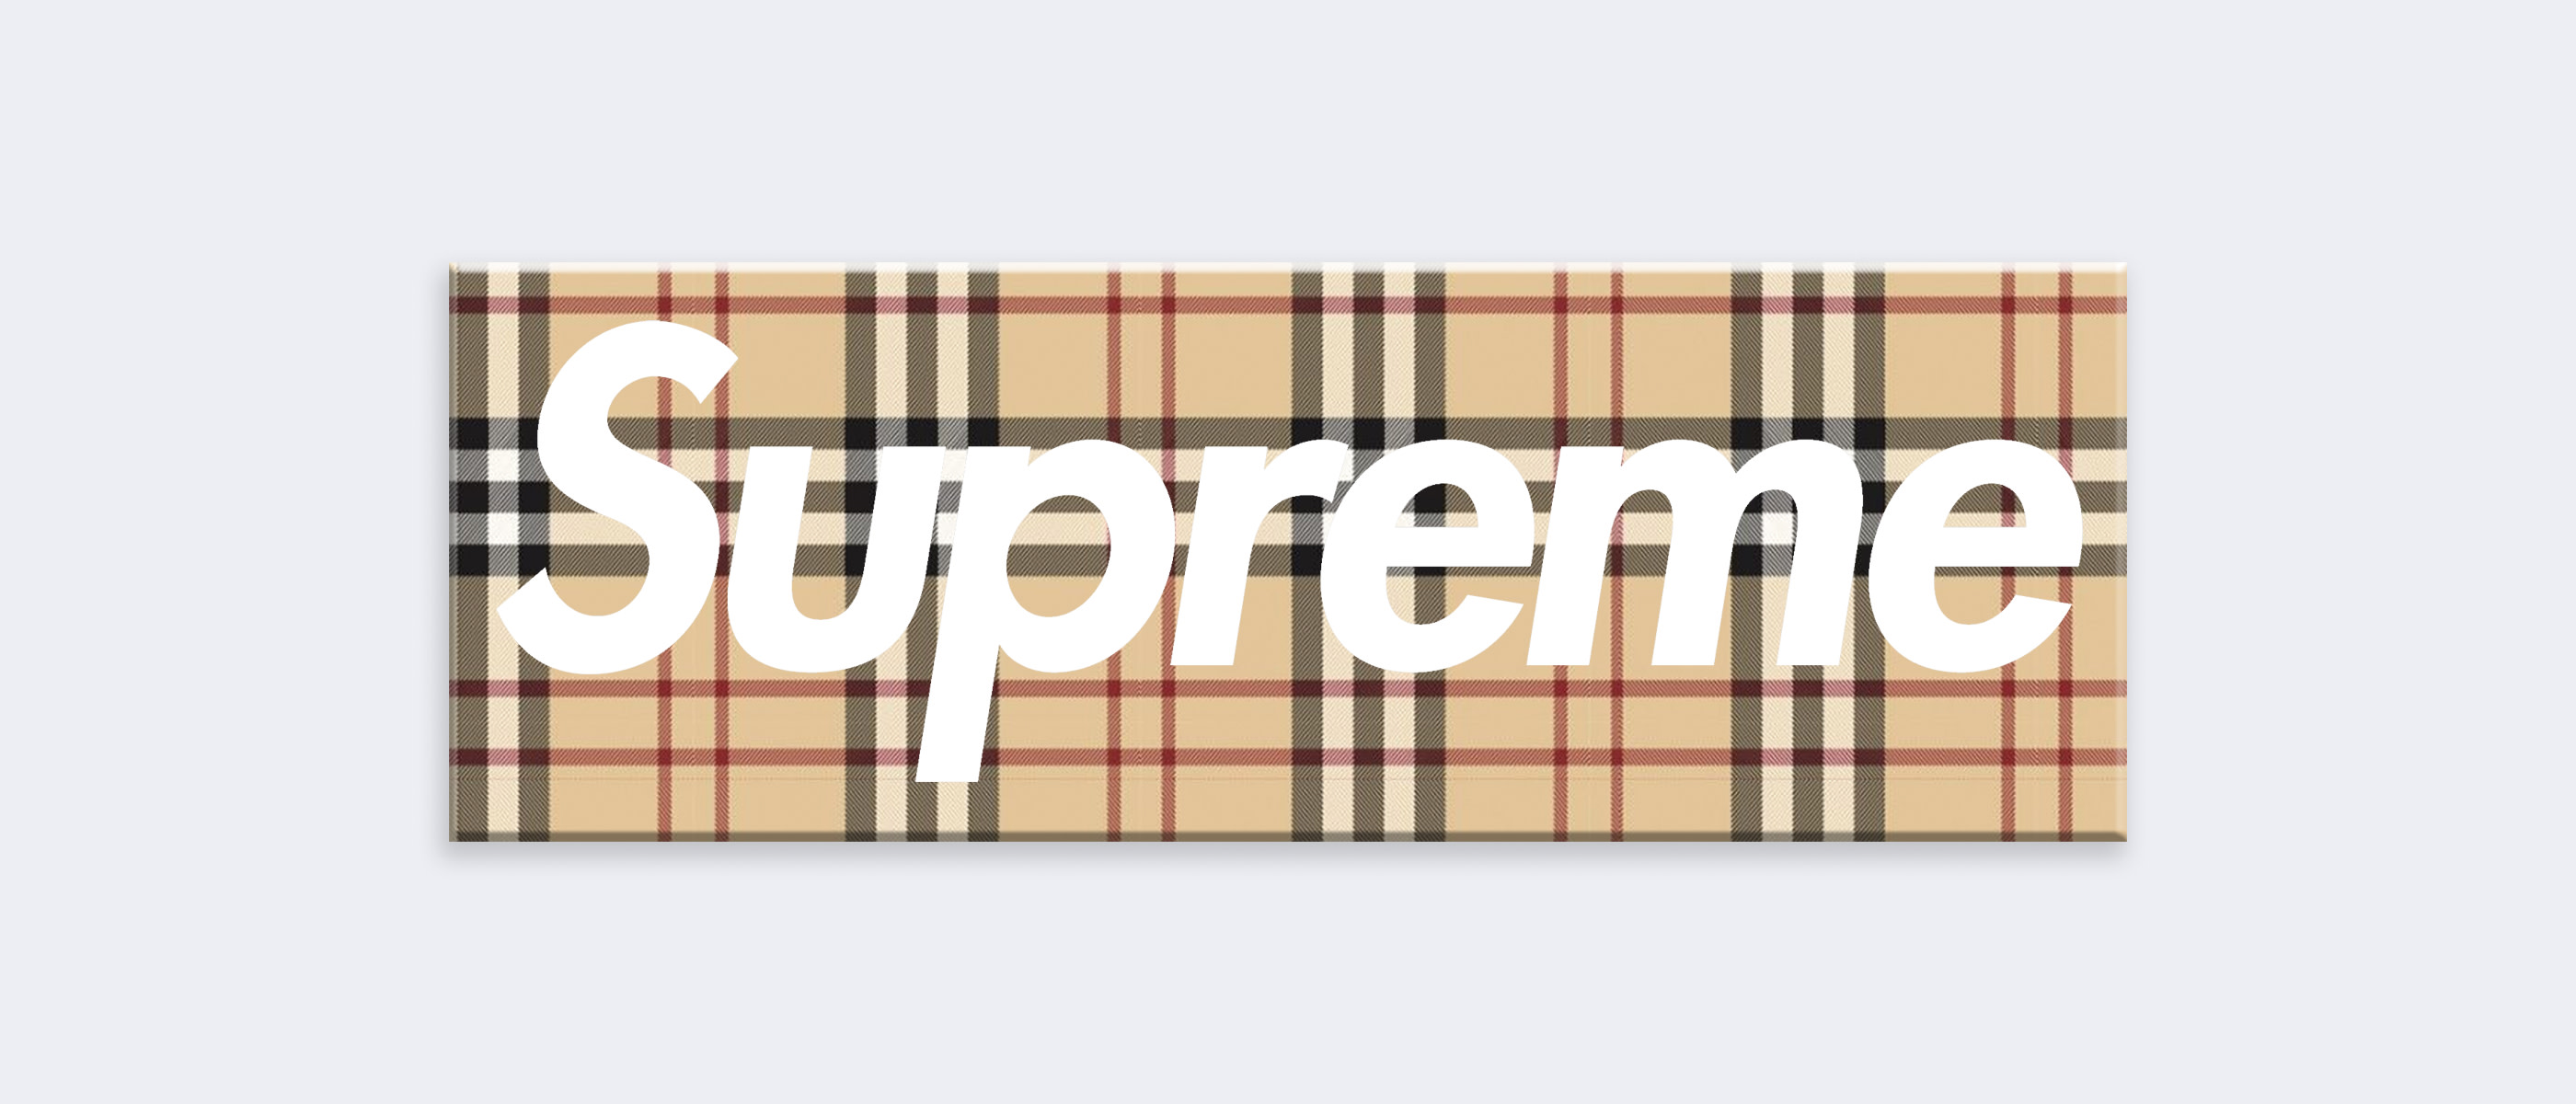 Check mate: Supreme and Burberry have collaborated